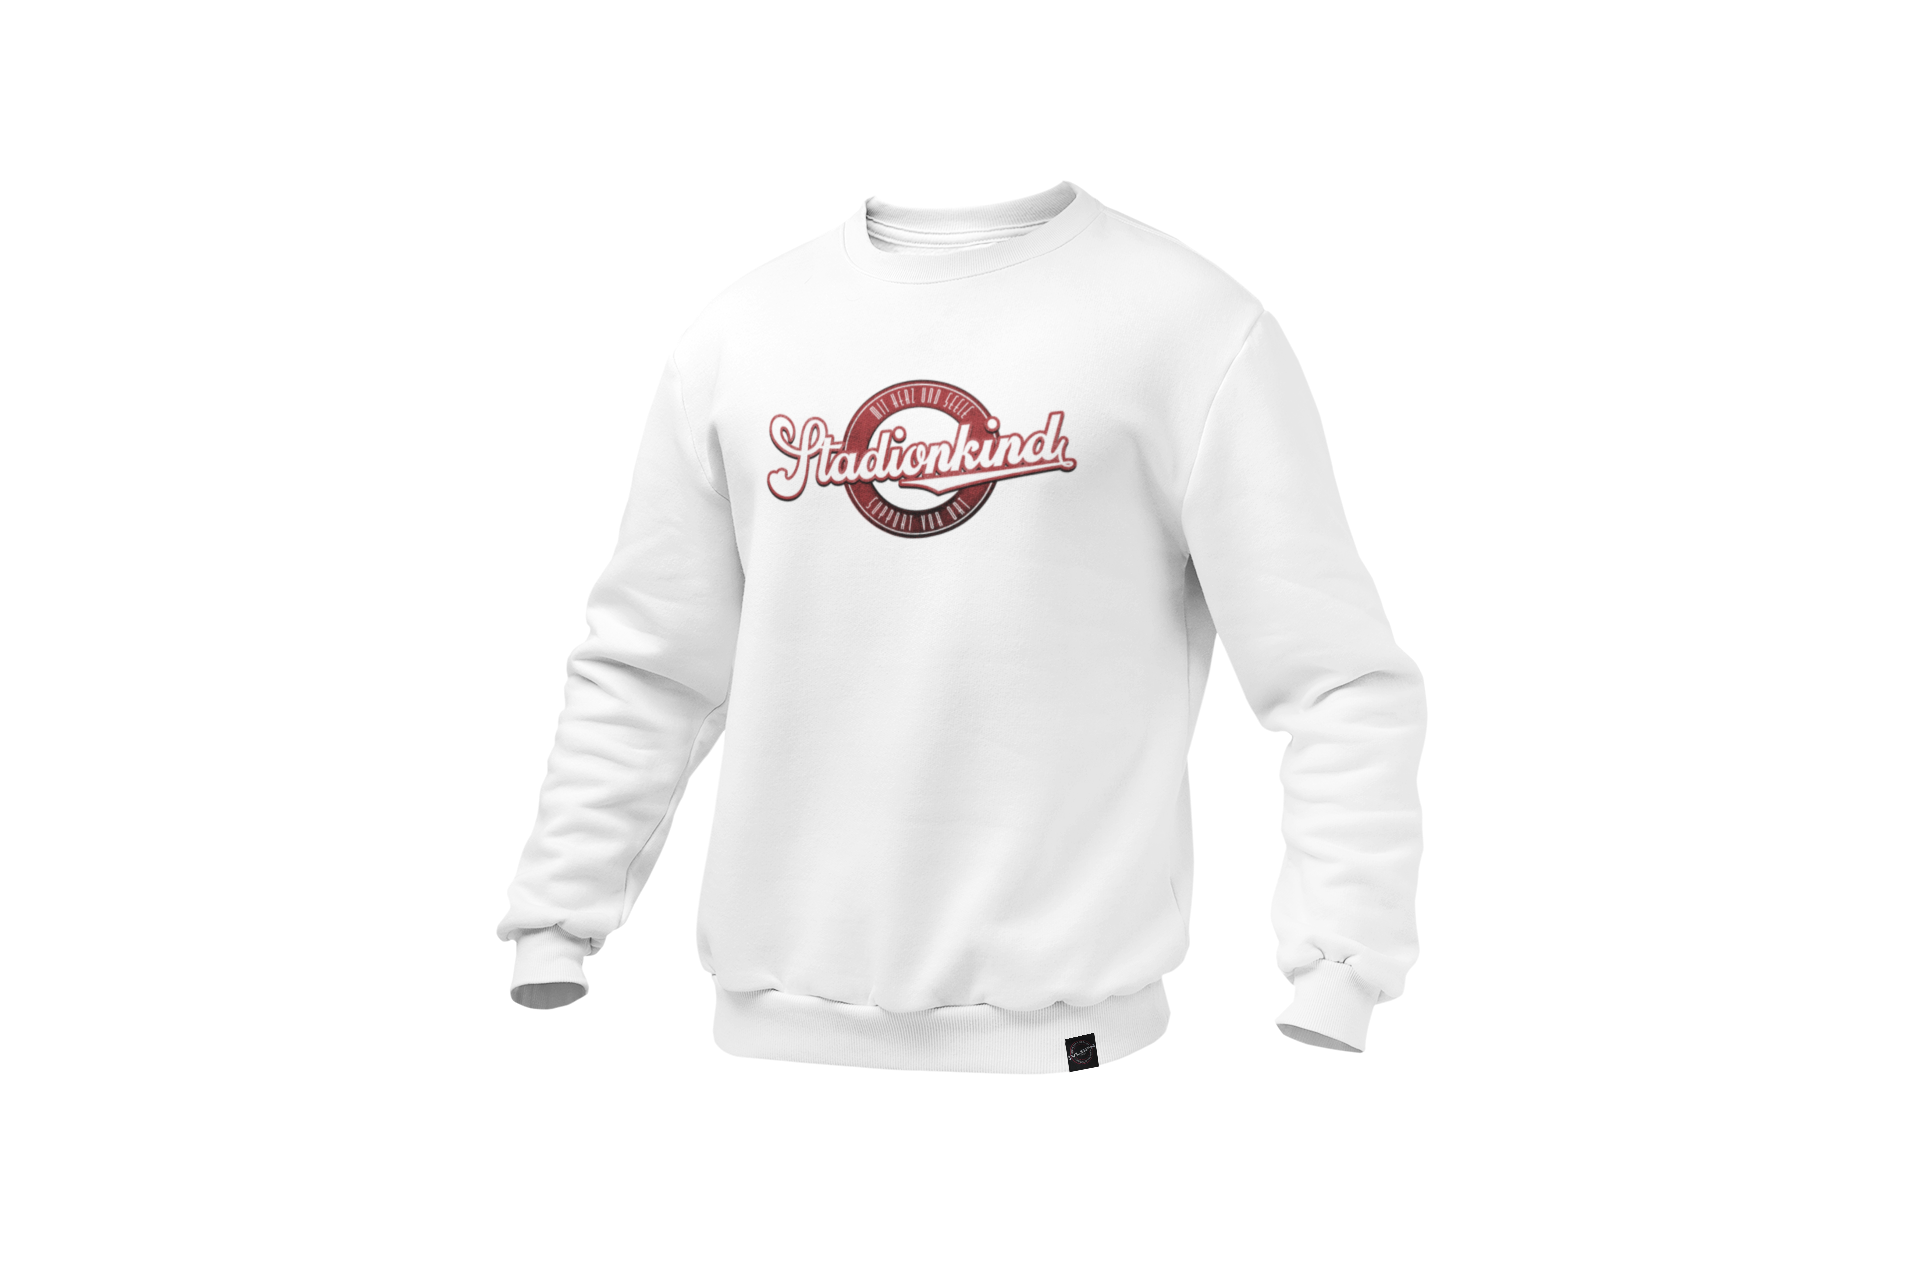 mockup-of-a-ghosted-crewneck-sweatshirt-over-a-solid-background-26960 (64).png